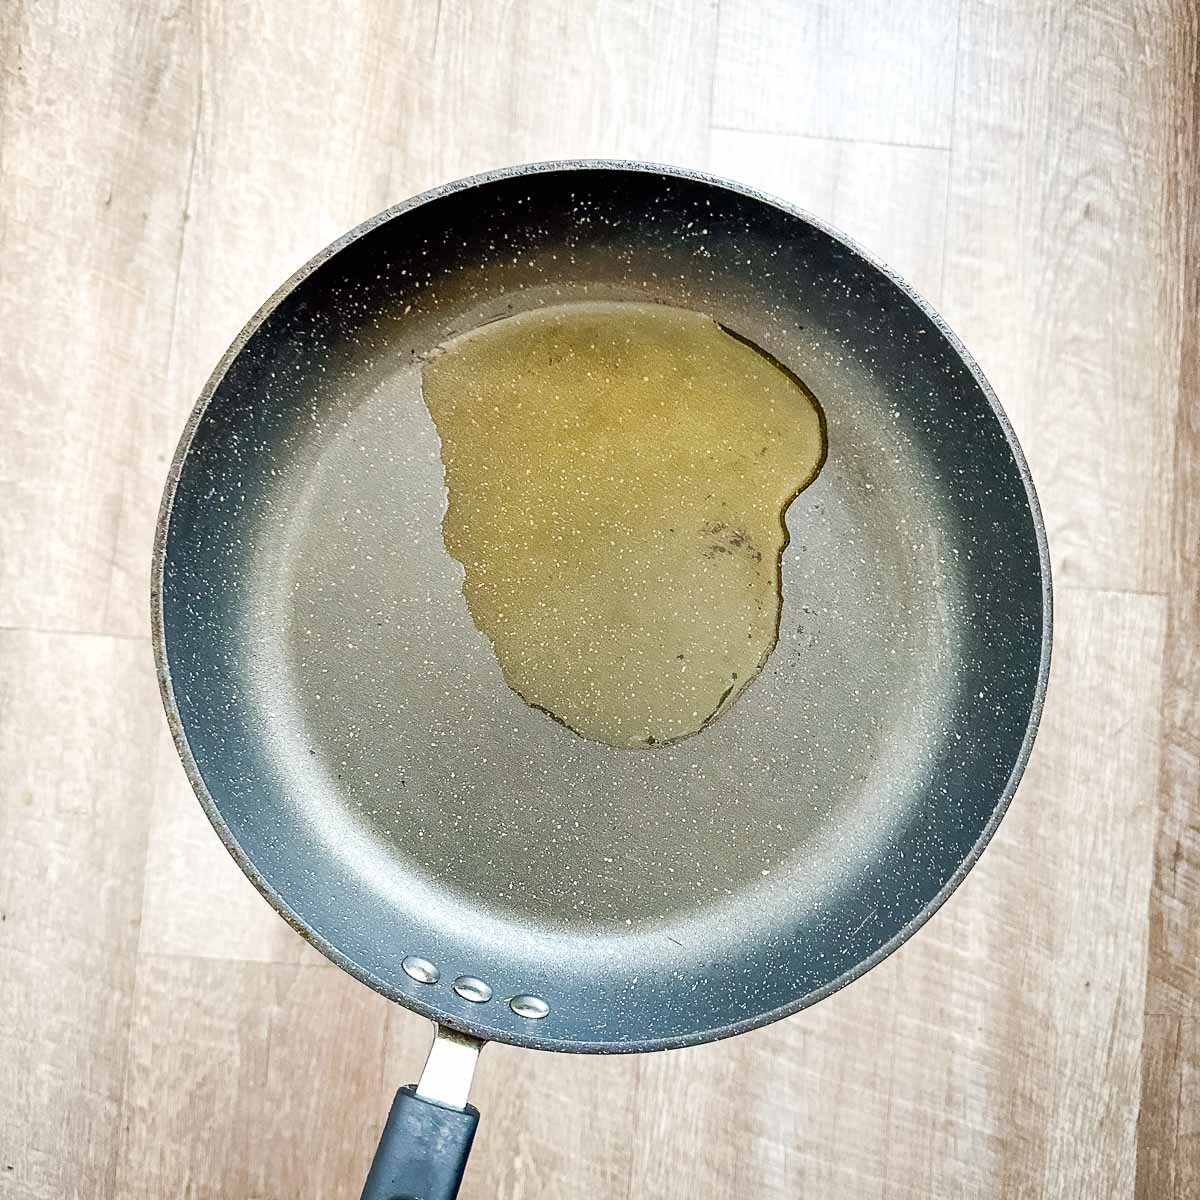 A frying pan with a drop of oil in it.